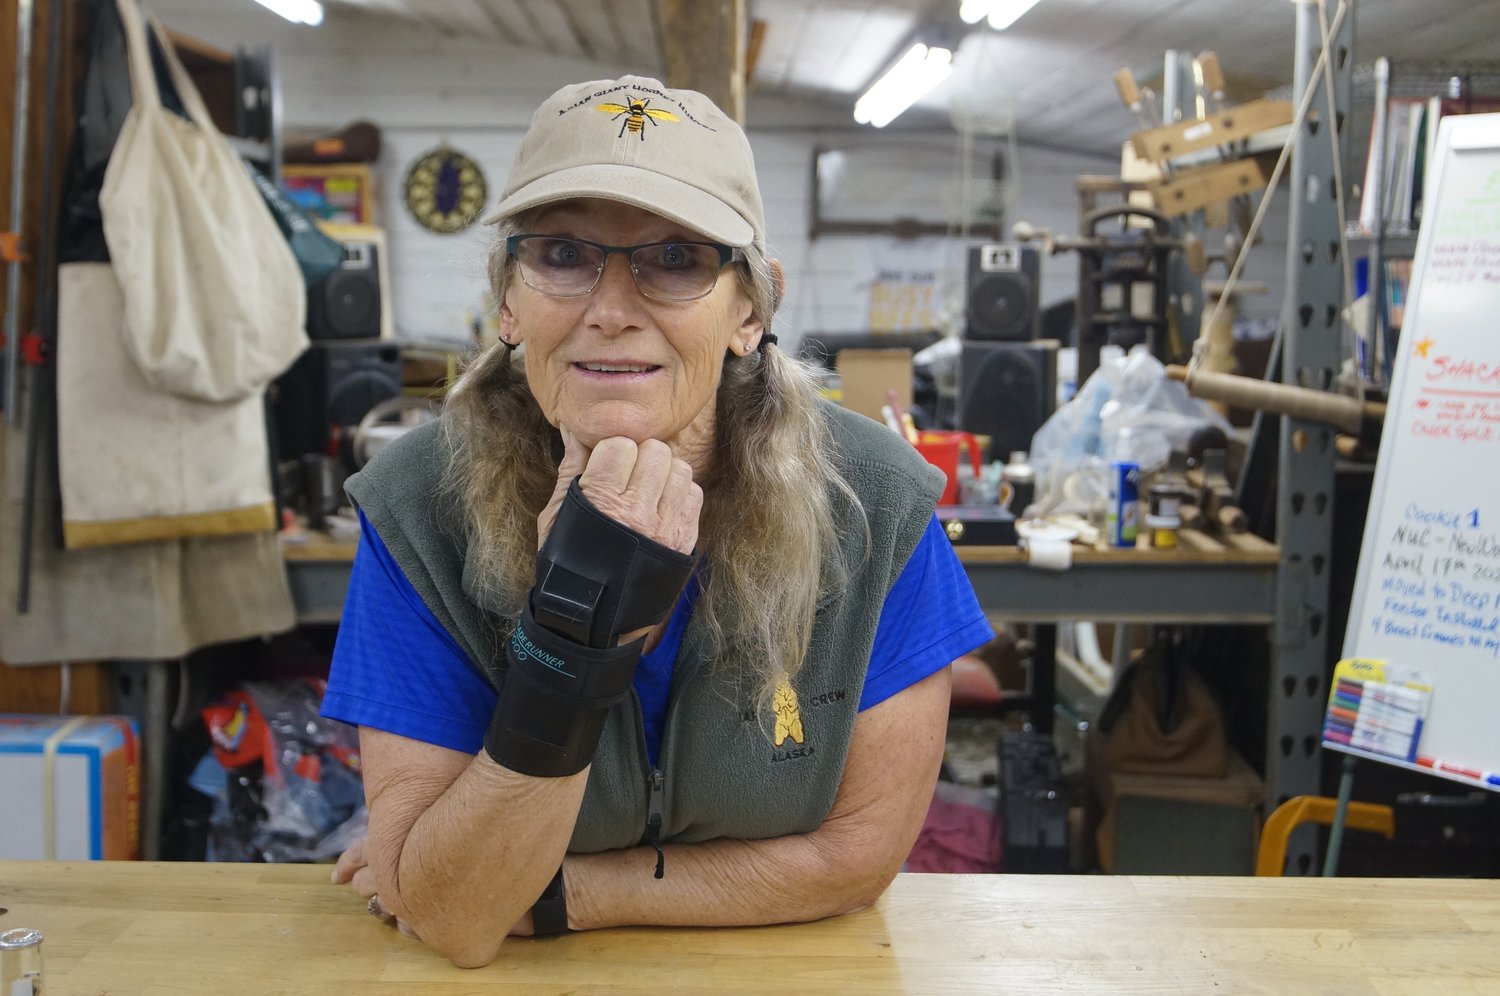 Birch Bay beekeeper Ruthie Danielsen purchased the first Asian giant hornet nest found in the U.S. to help advance understanding of the invasive species.